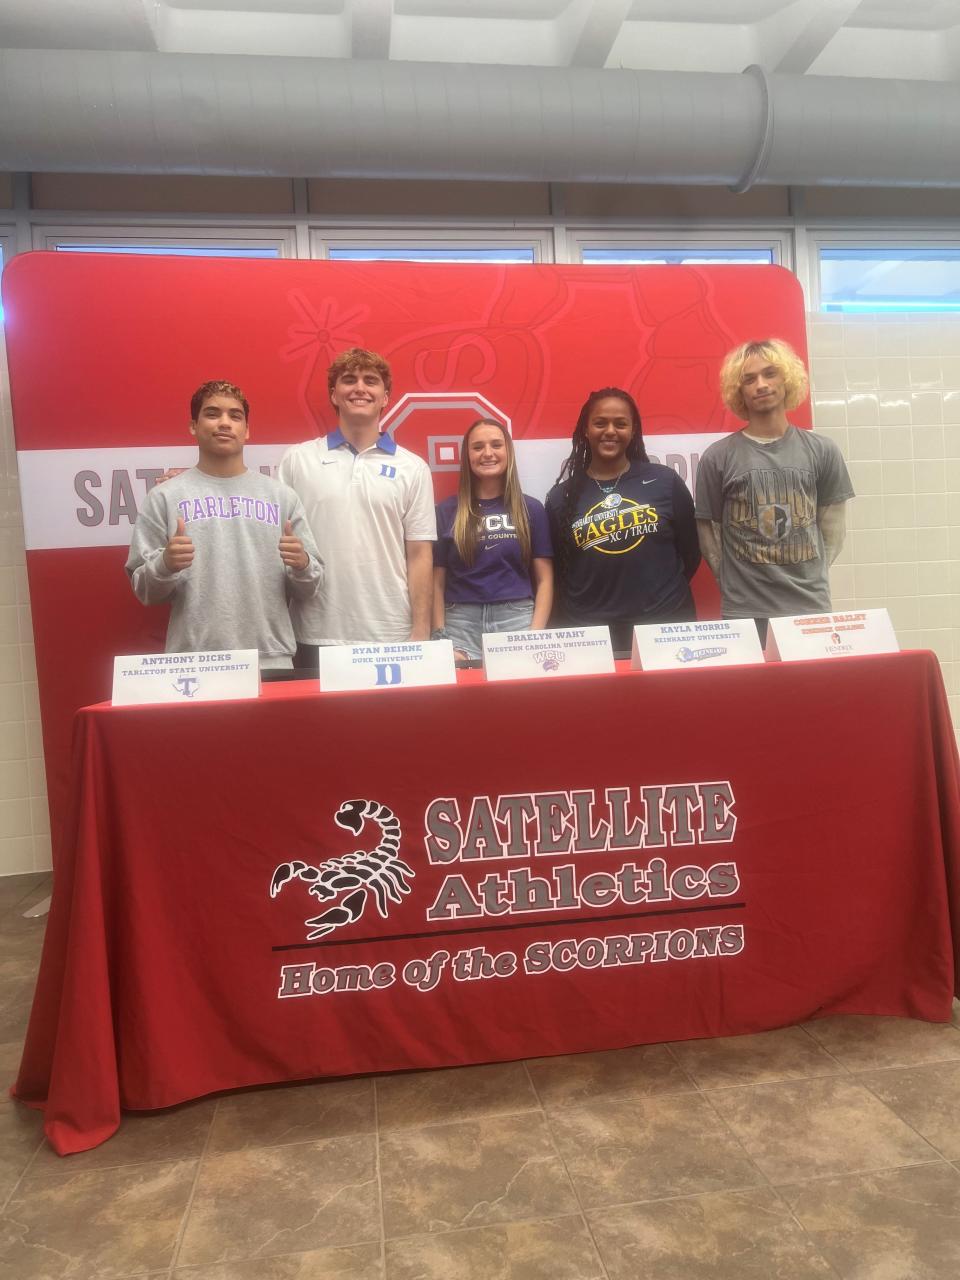 Spring signees at Satellite High (left to right): Anthony Dicks and Ryan Beirne, wrestling; Braelyn Wahy, track & field/cross country; Kayla Morris and Conner Bailey, track & field.